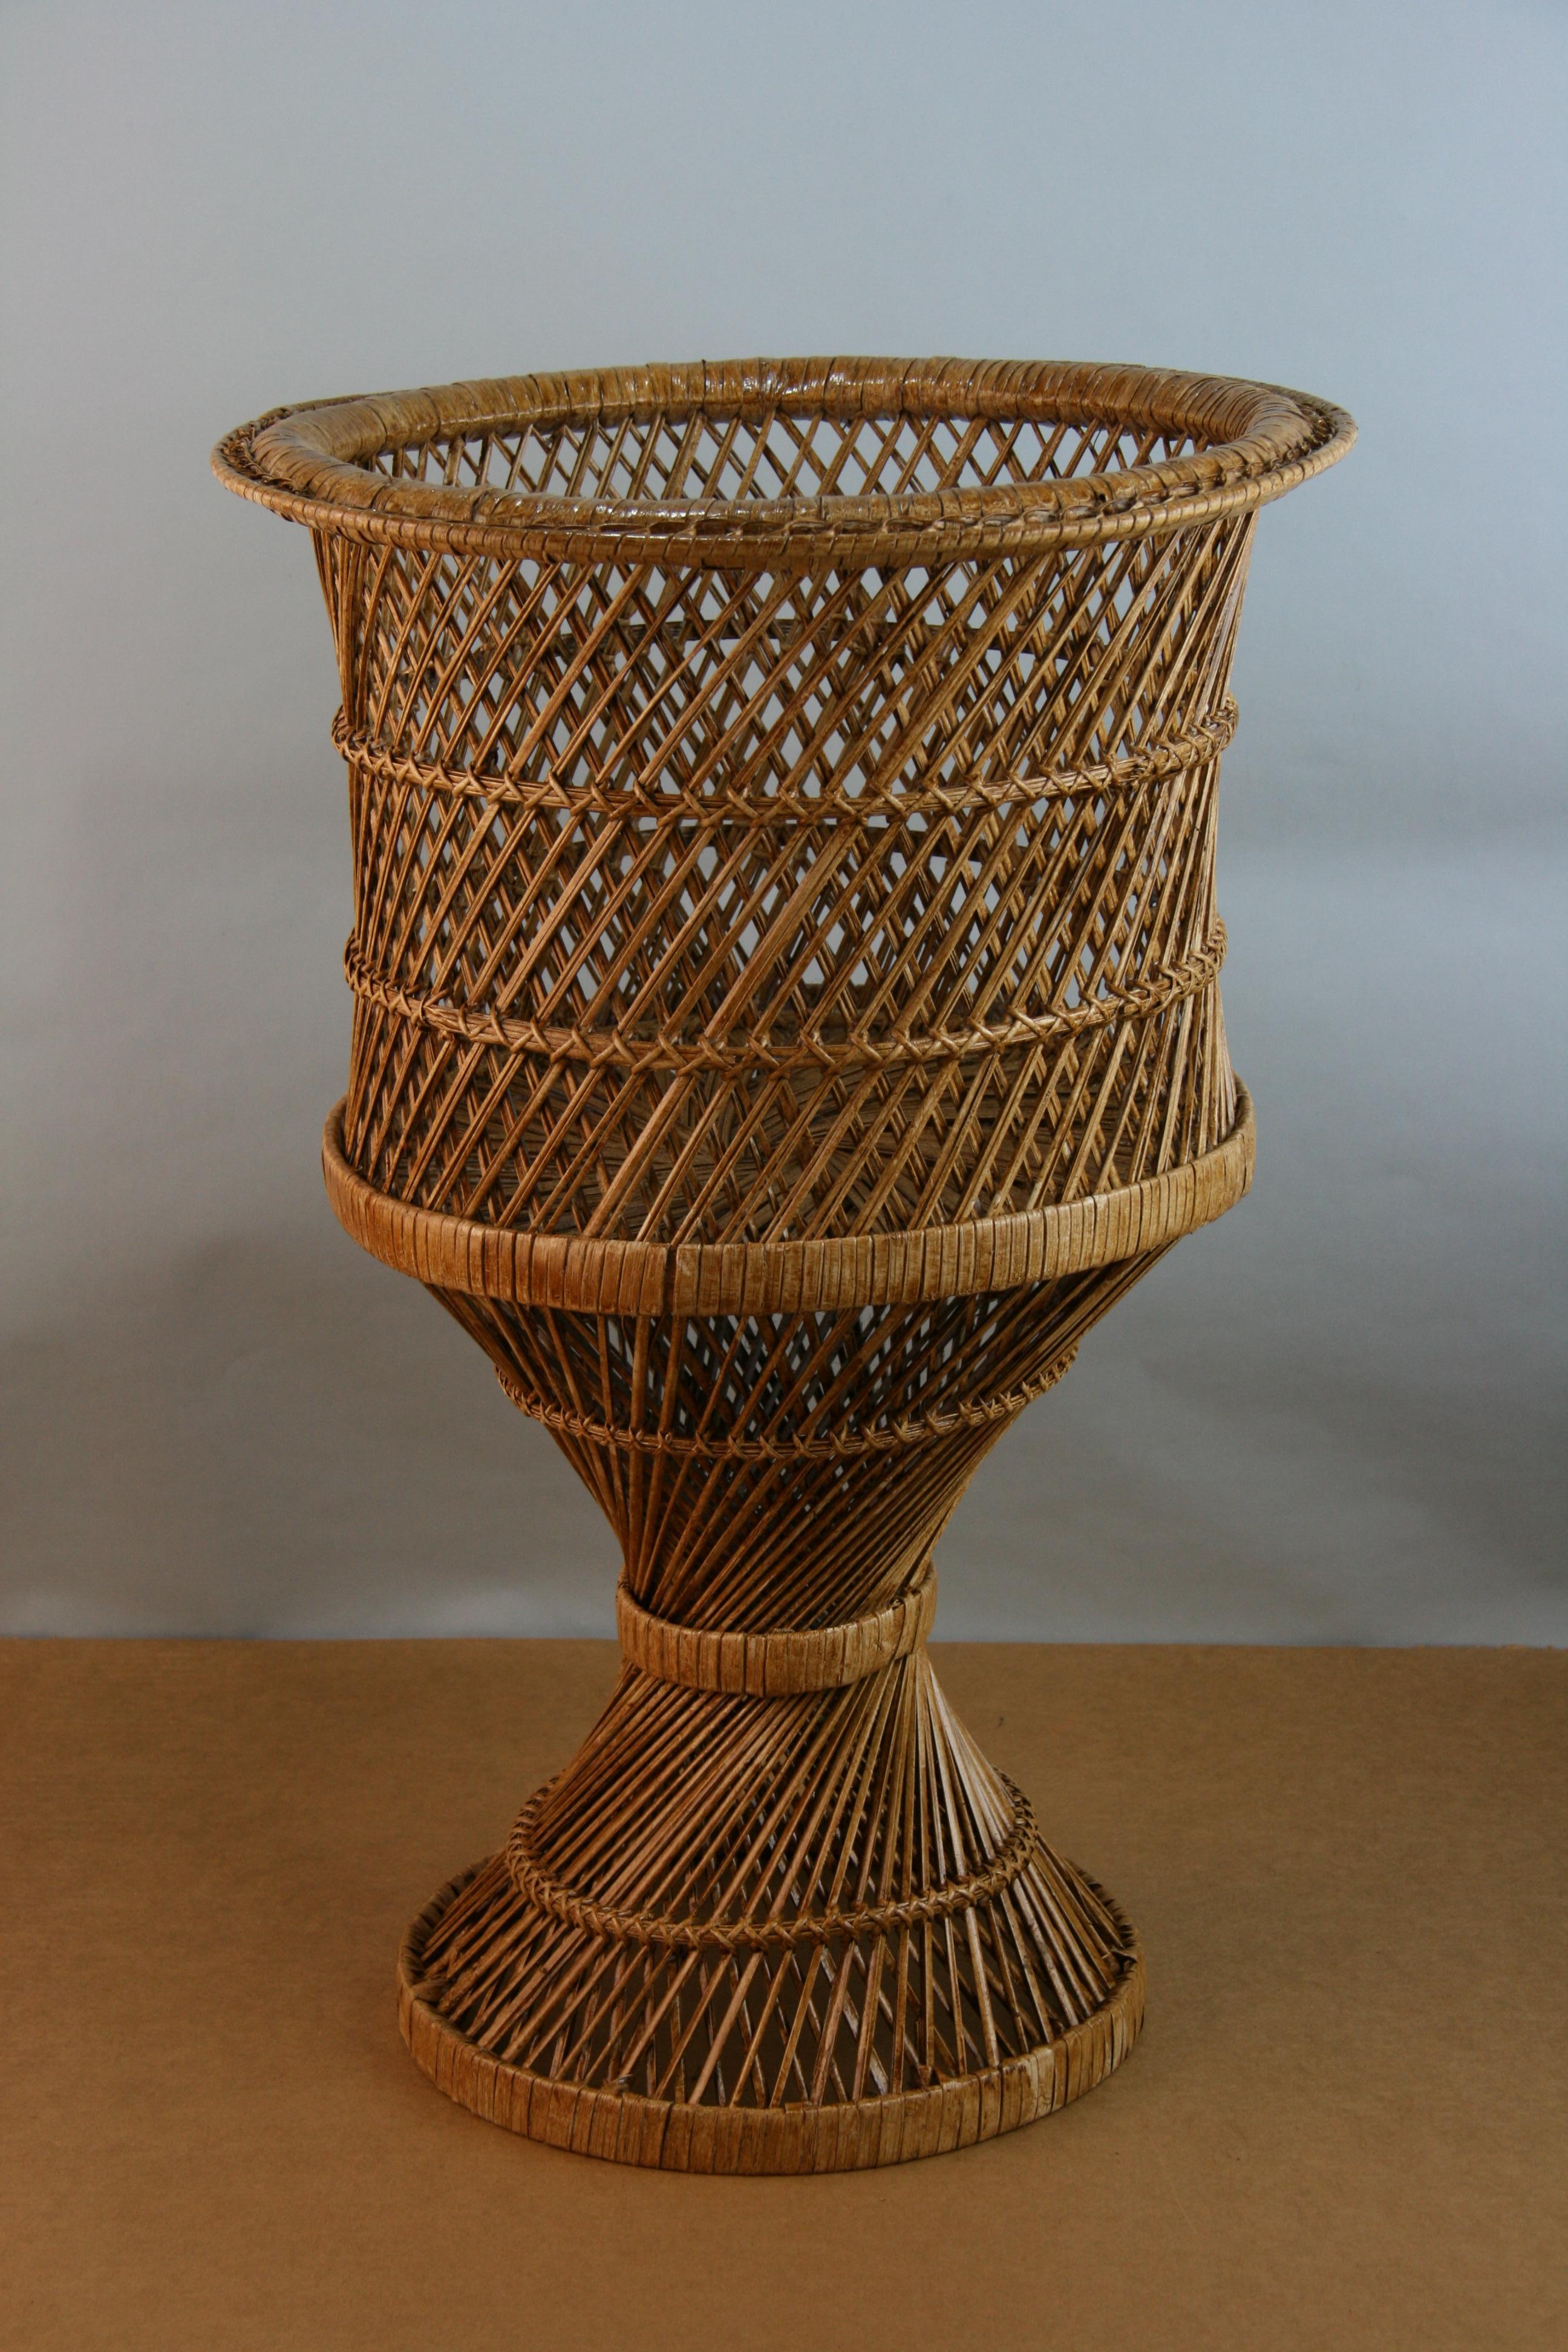 3-717 Hand woven plant stand.
Overall dimensions 15.5